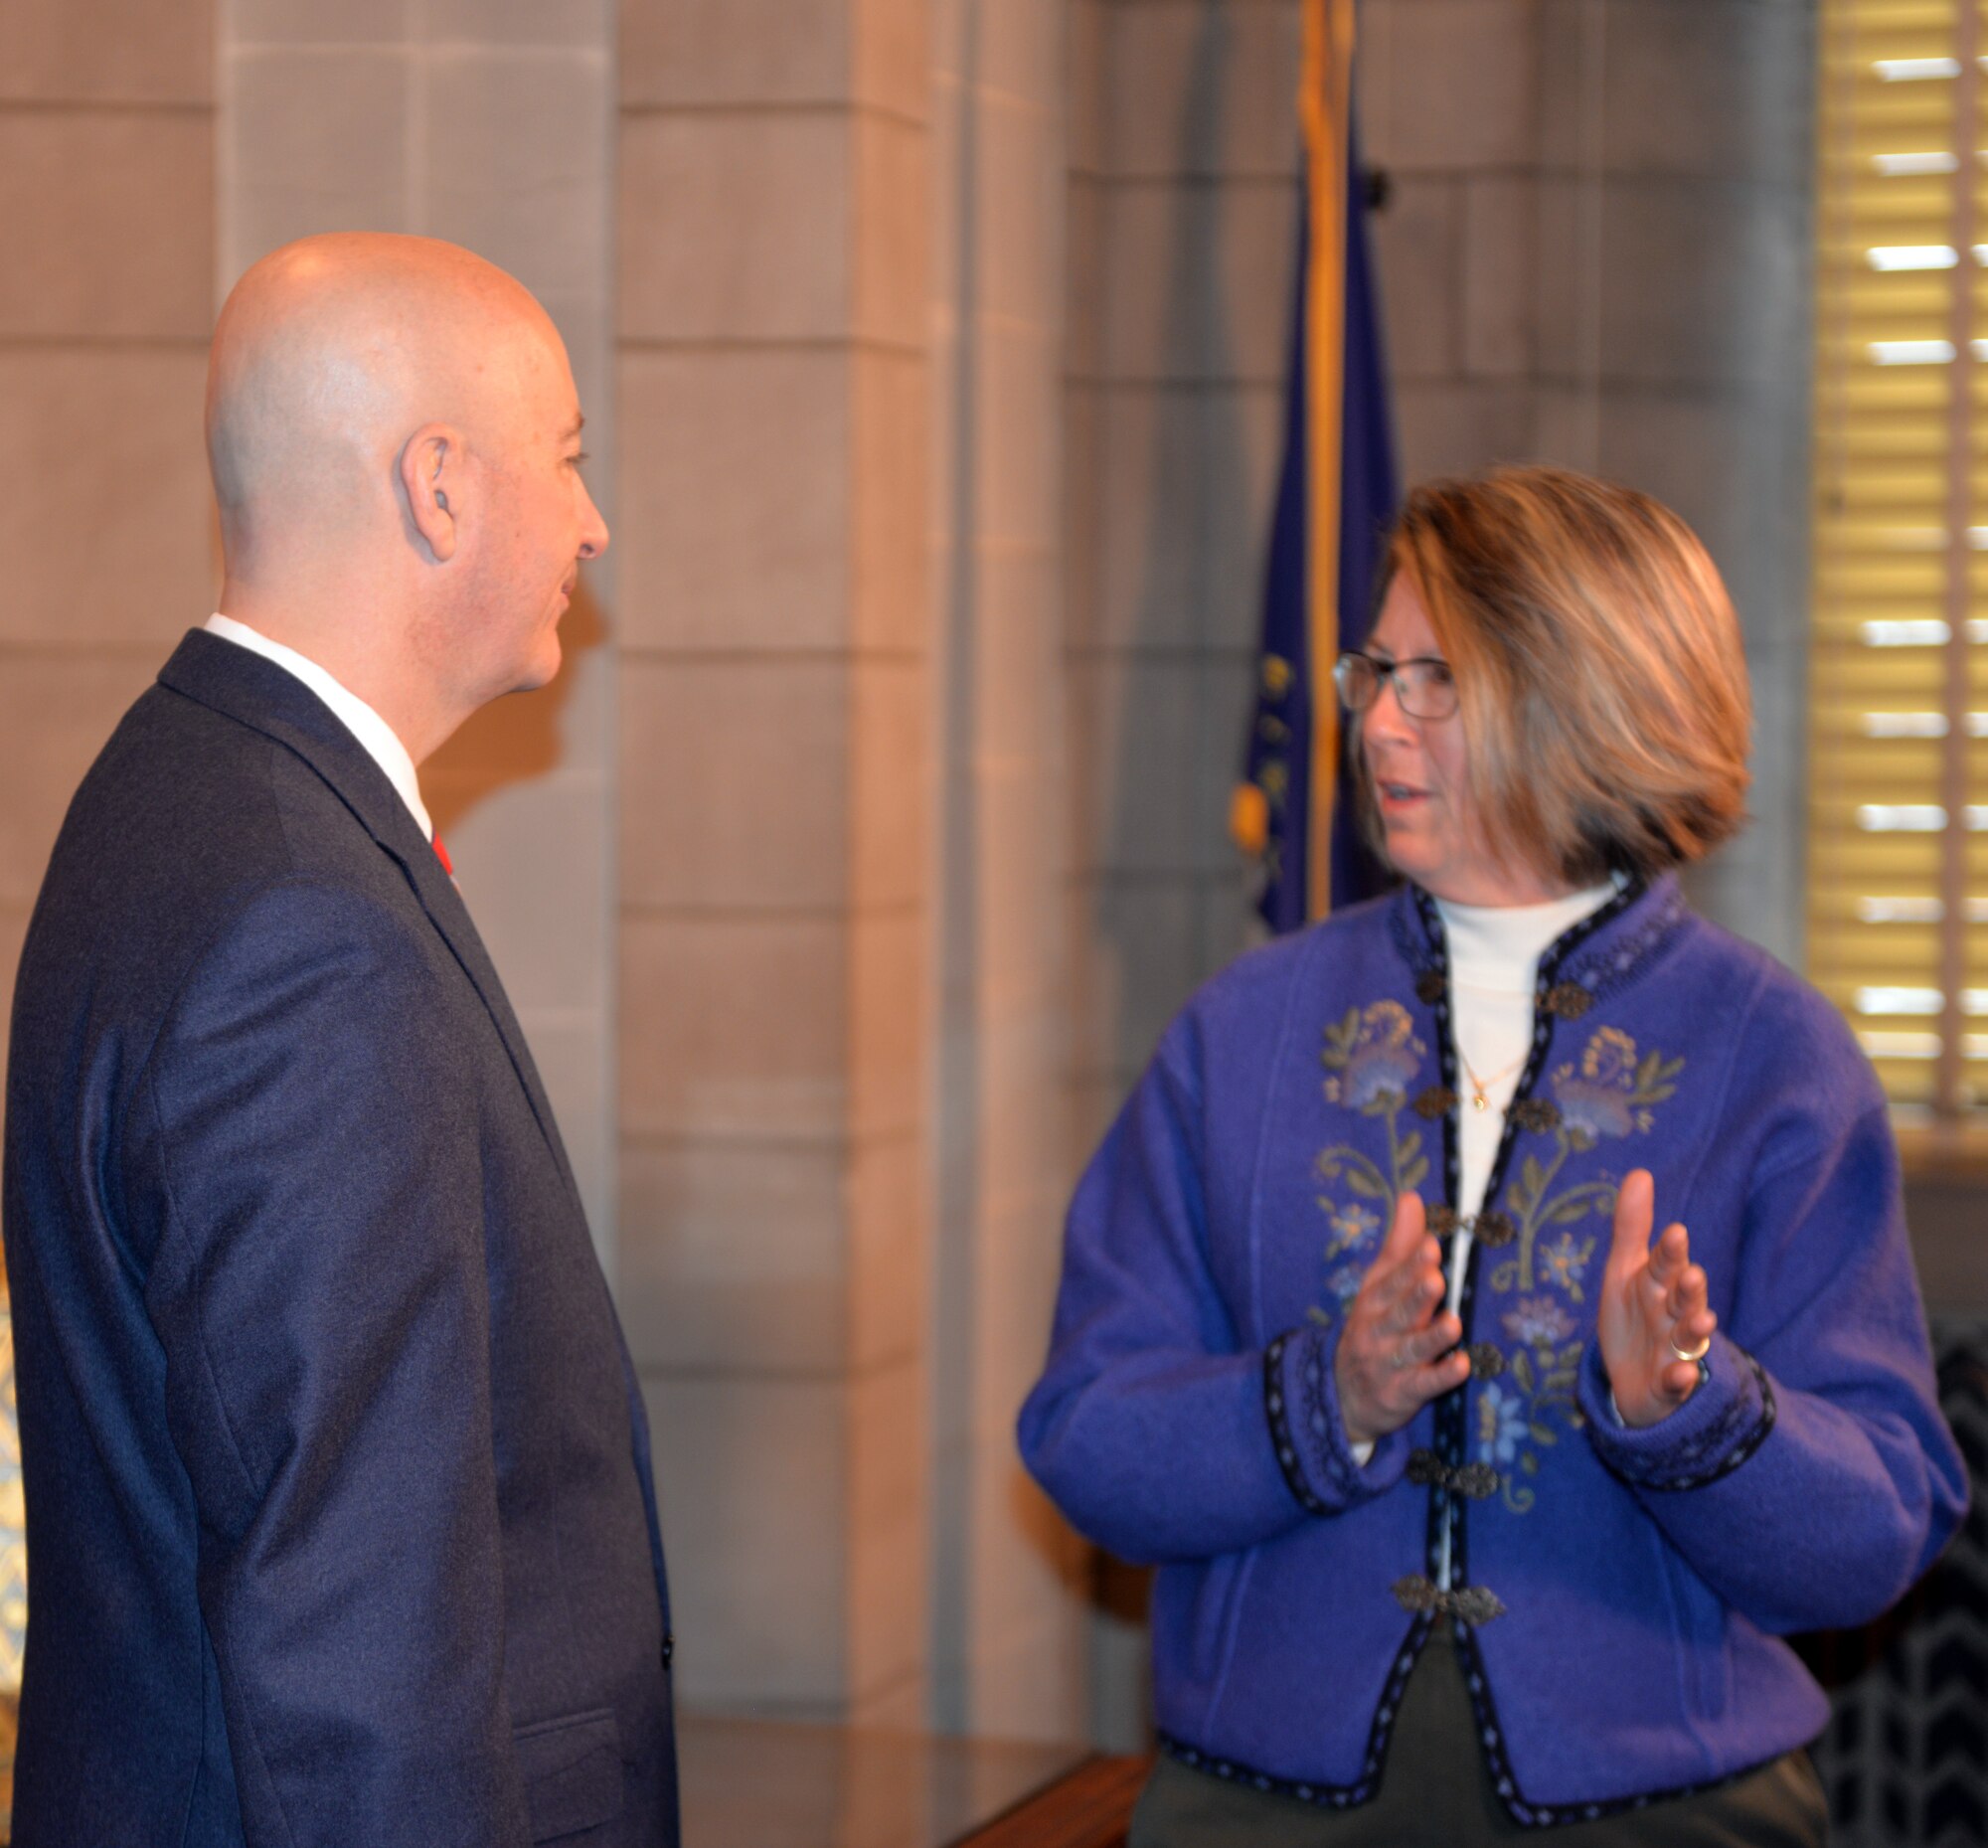 Julie Copley, spouse of Rear Adm. Curt Copley, U.S. Strategic Command (USSTRATCOM) Navy Element Commander and Director of Intelligence, discusses issues and challenges facing military spouses with Nebraska Gov. Pete Ricketts March 19, 2018, at the Nebraska State Capitol in Lincoln, Nebraska. Copley was on-hand, along with other Offutt-based military spouses, to witness the governor sign a rule change which will make it easier for military spouses to teach immediately if they have recently arrived from out of state.